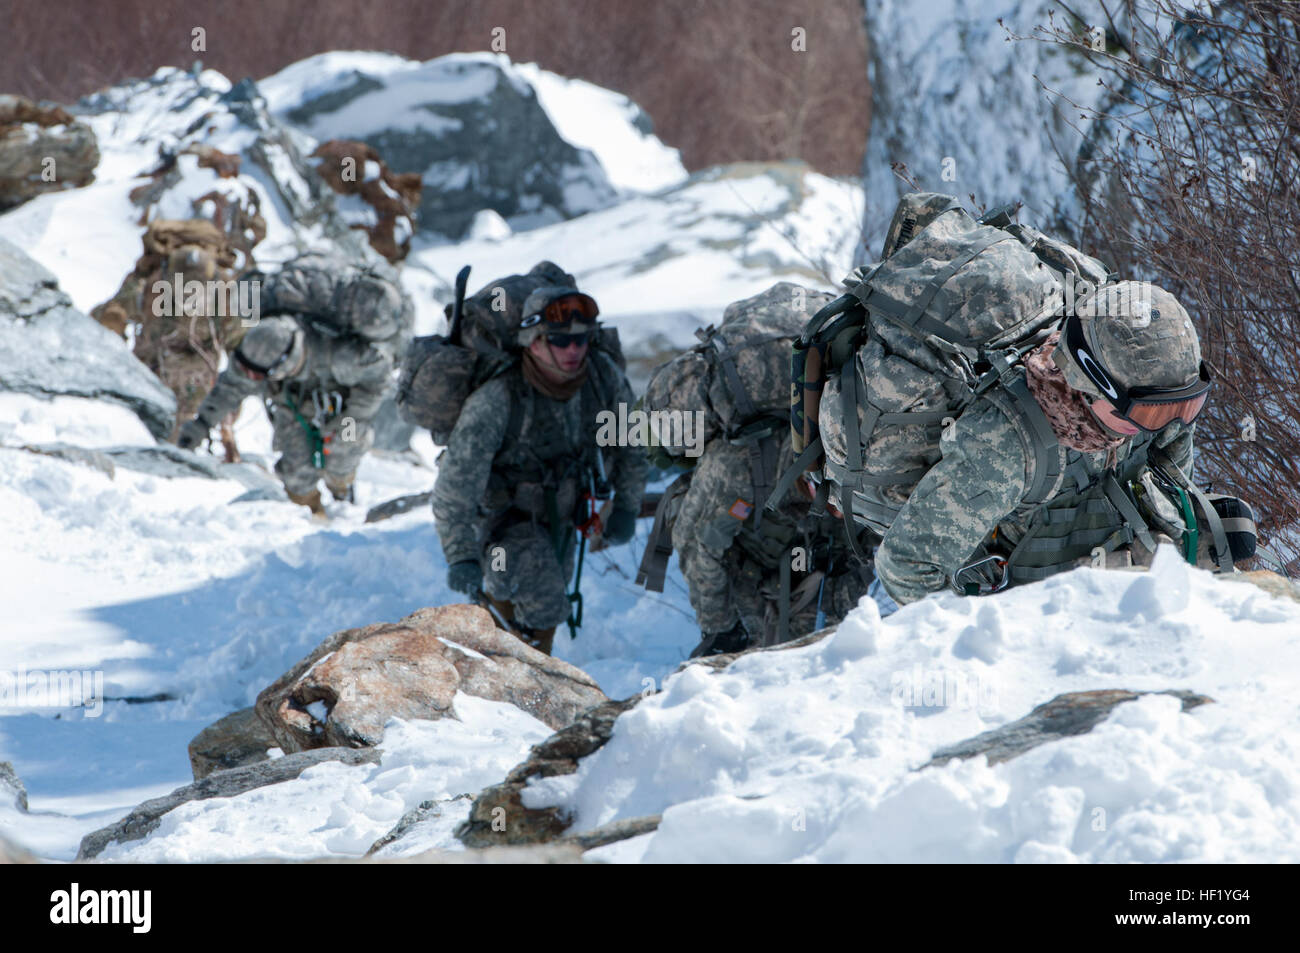 U.S. Soldiers with the Army Mountain Warfare Basic Mountaineering and